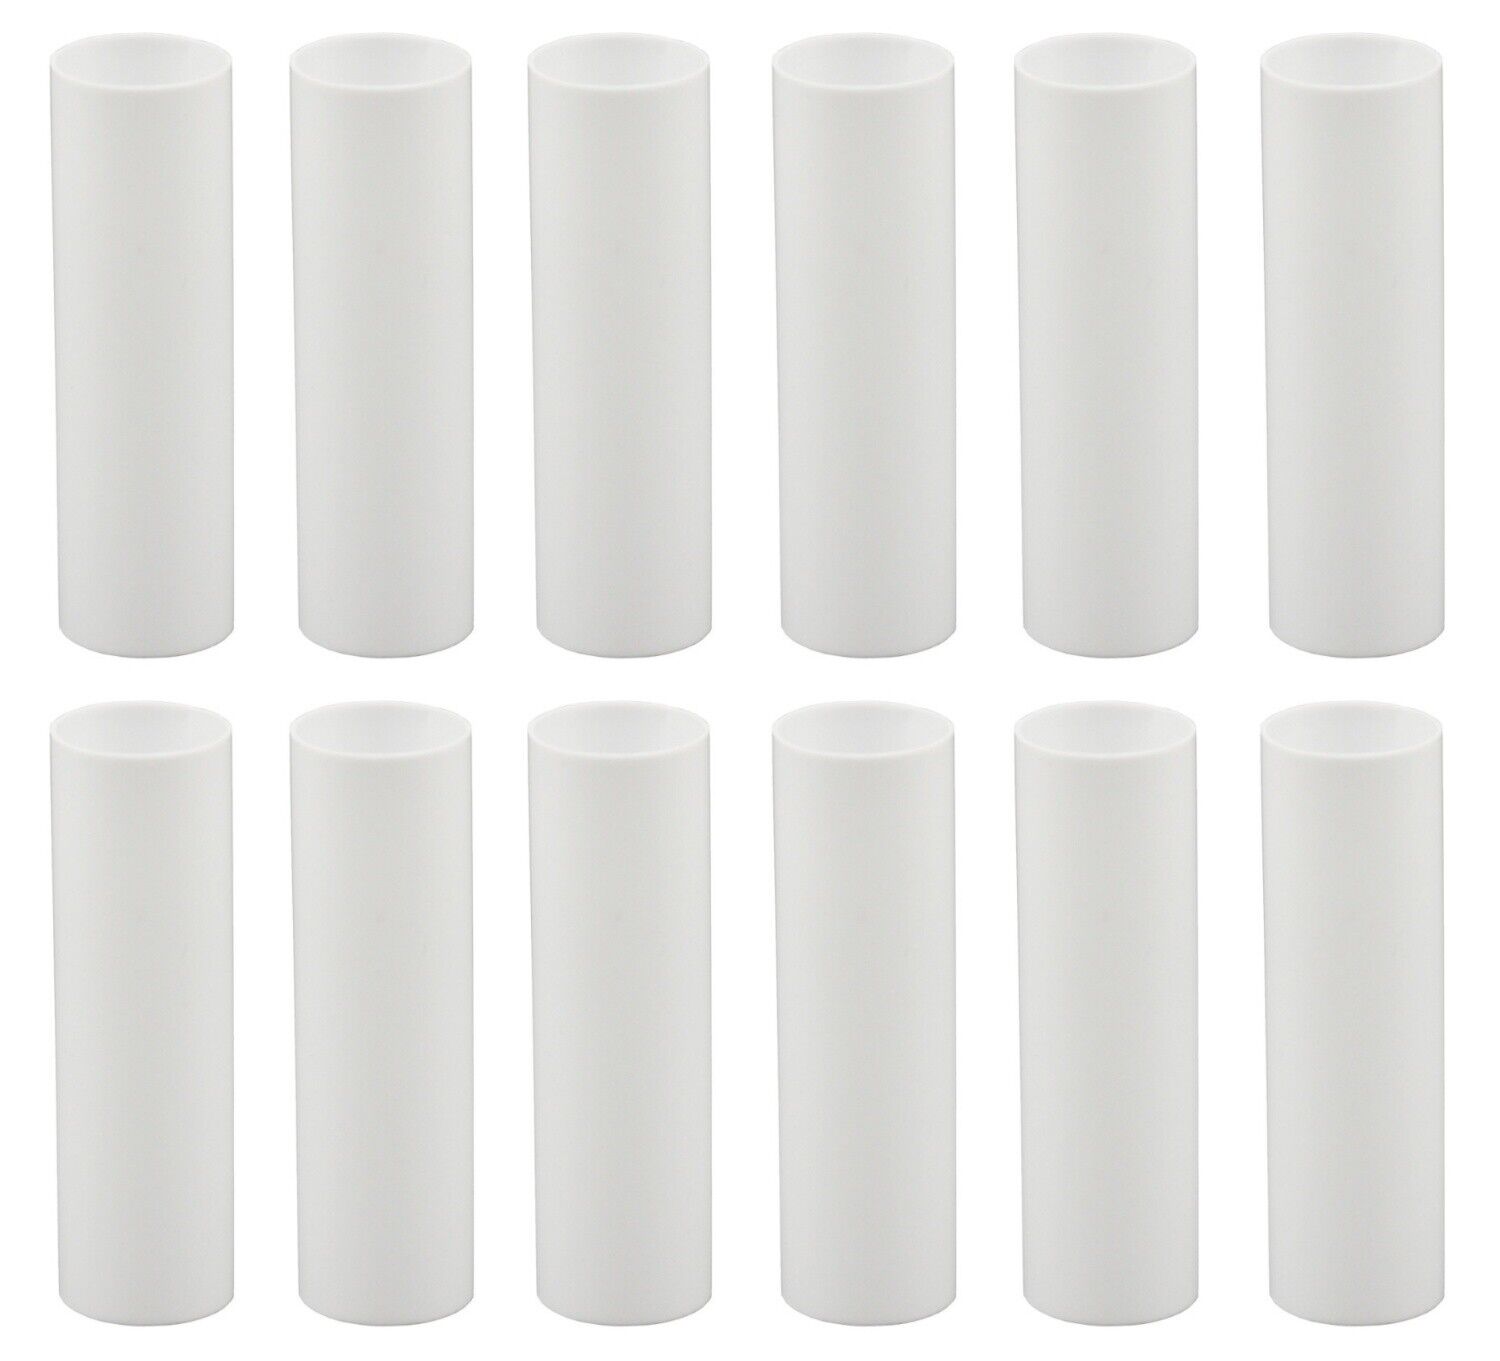 3 Inch White Plastic Candle Cover For Candelabra Base Lamp Sockets, 12 Pieces